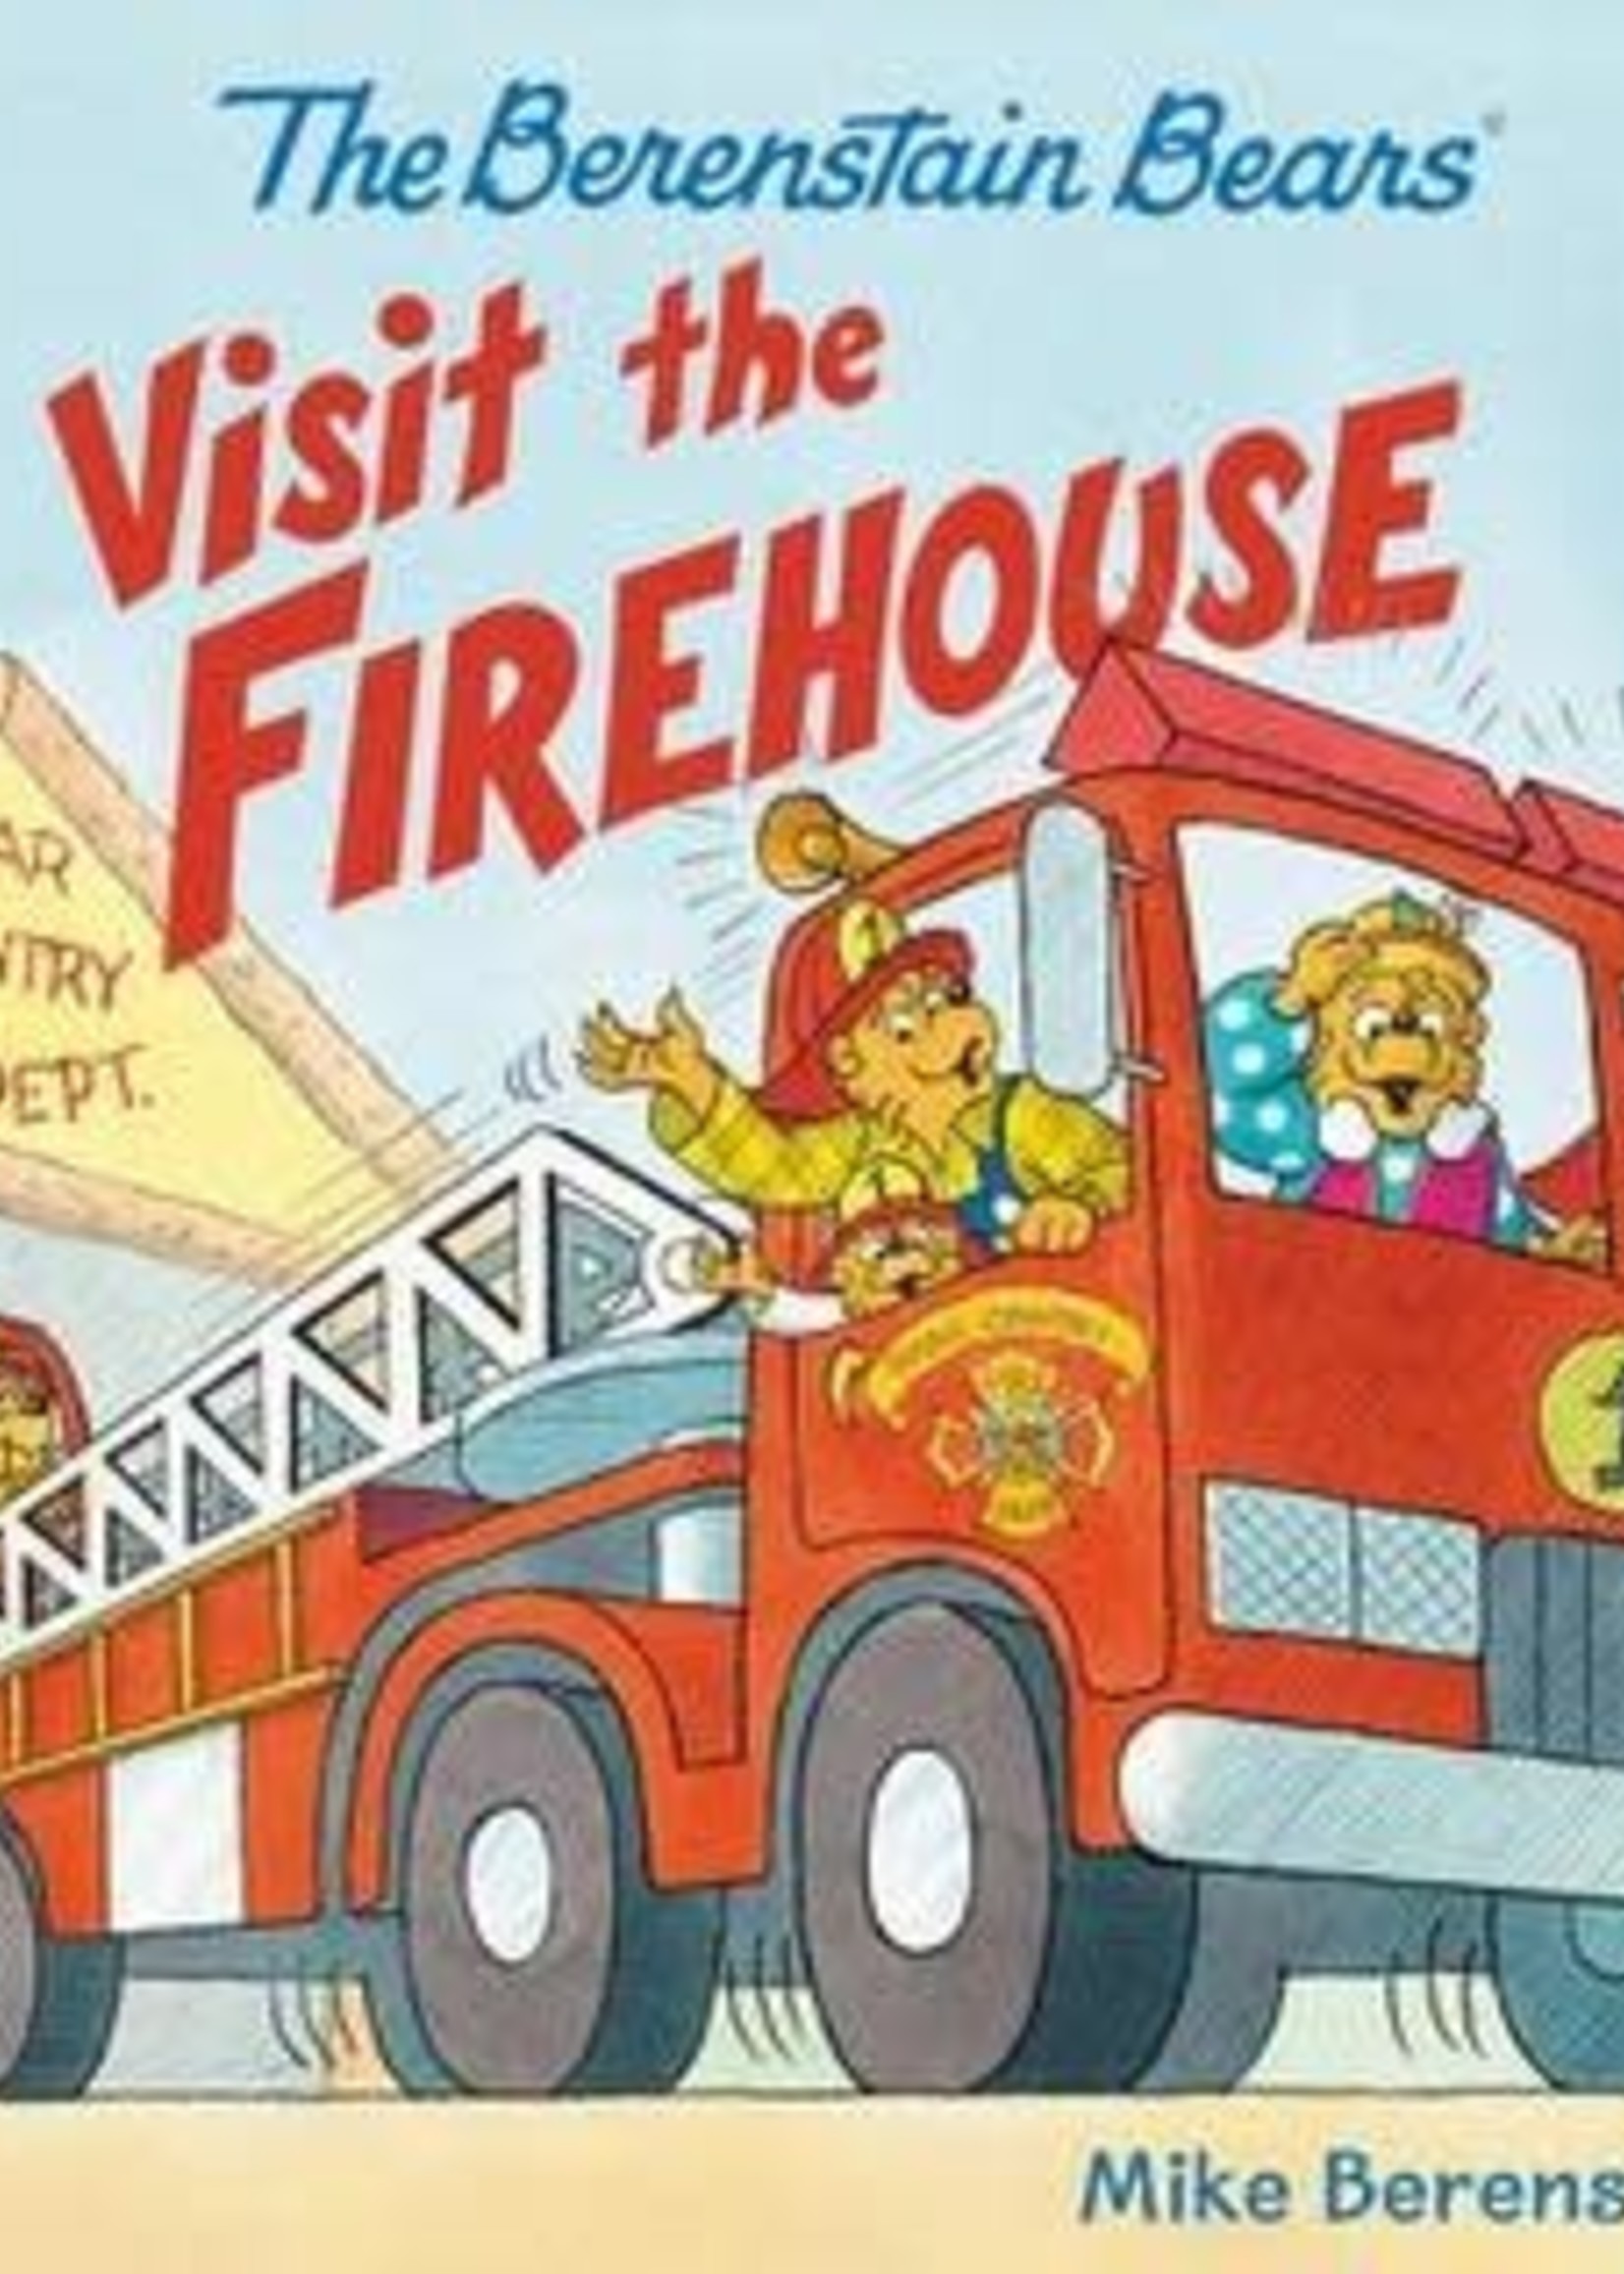 The Berenstain Bears Visit the Firehouse by Mike Berenstain